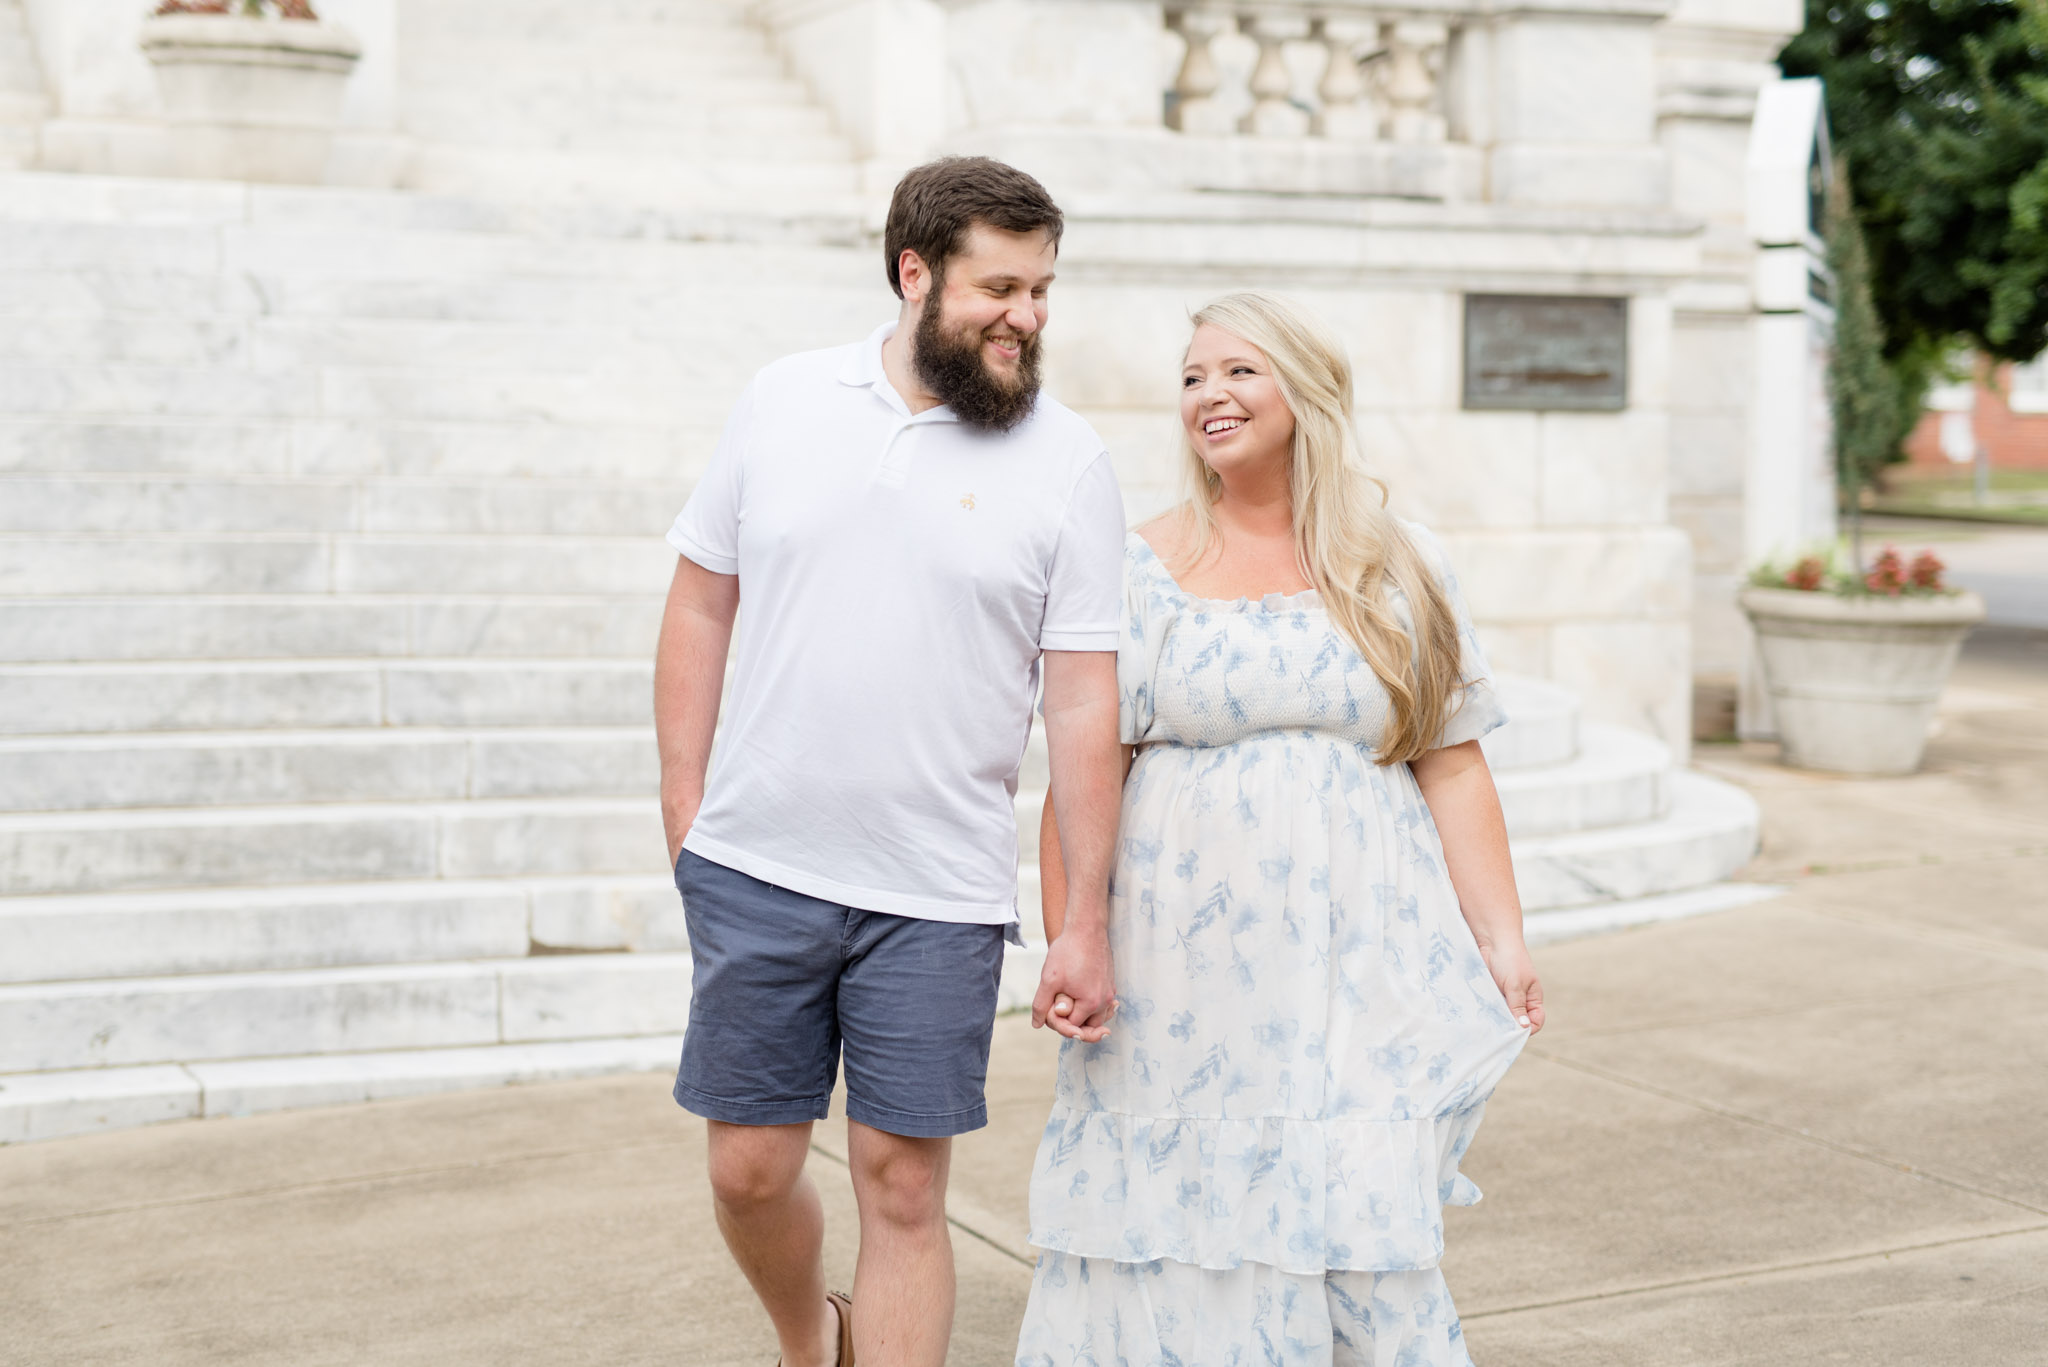 Husband and wife laugh as they walk.